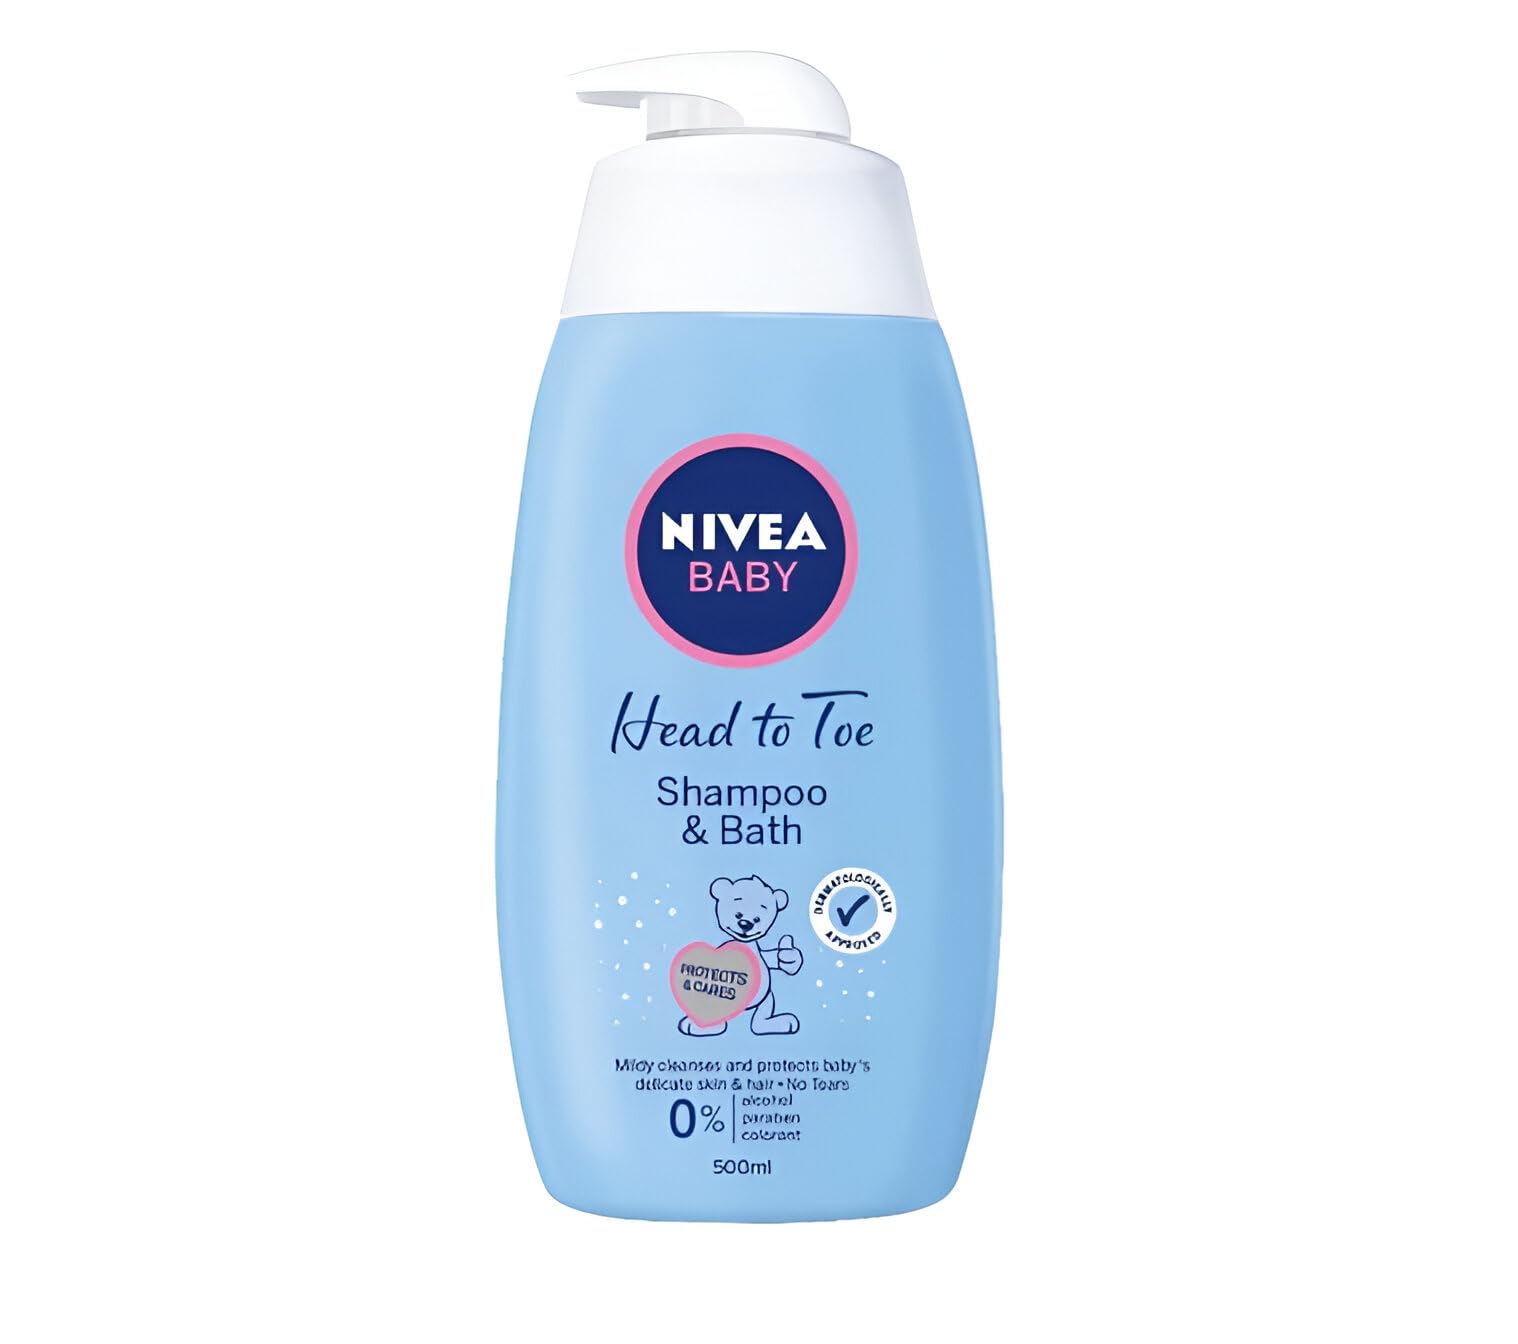 Nivea Baby Shampoo & Bath Foam Head to Toe Without Soap Without Parabens Soothing 0% Alcohol 0% Alkaline Soaps Skin Neutral Ph for Every Skin Type 500ml (Pack of 3)